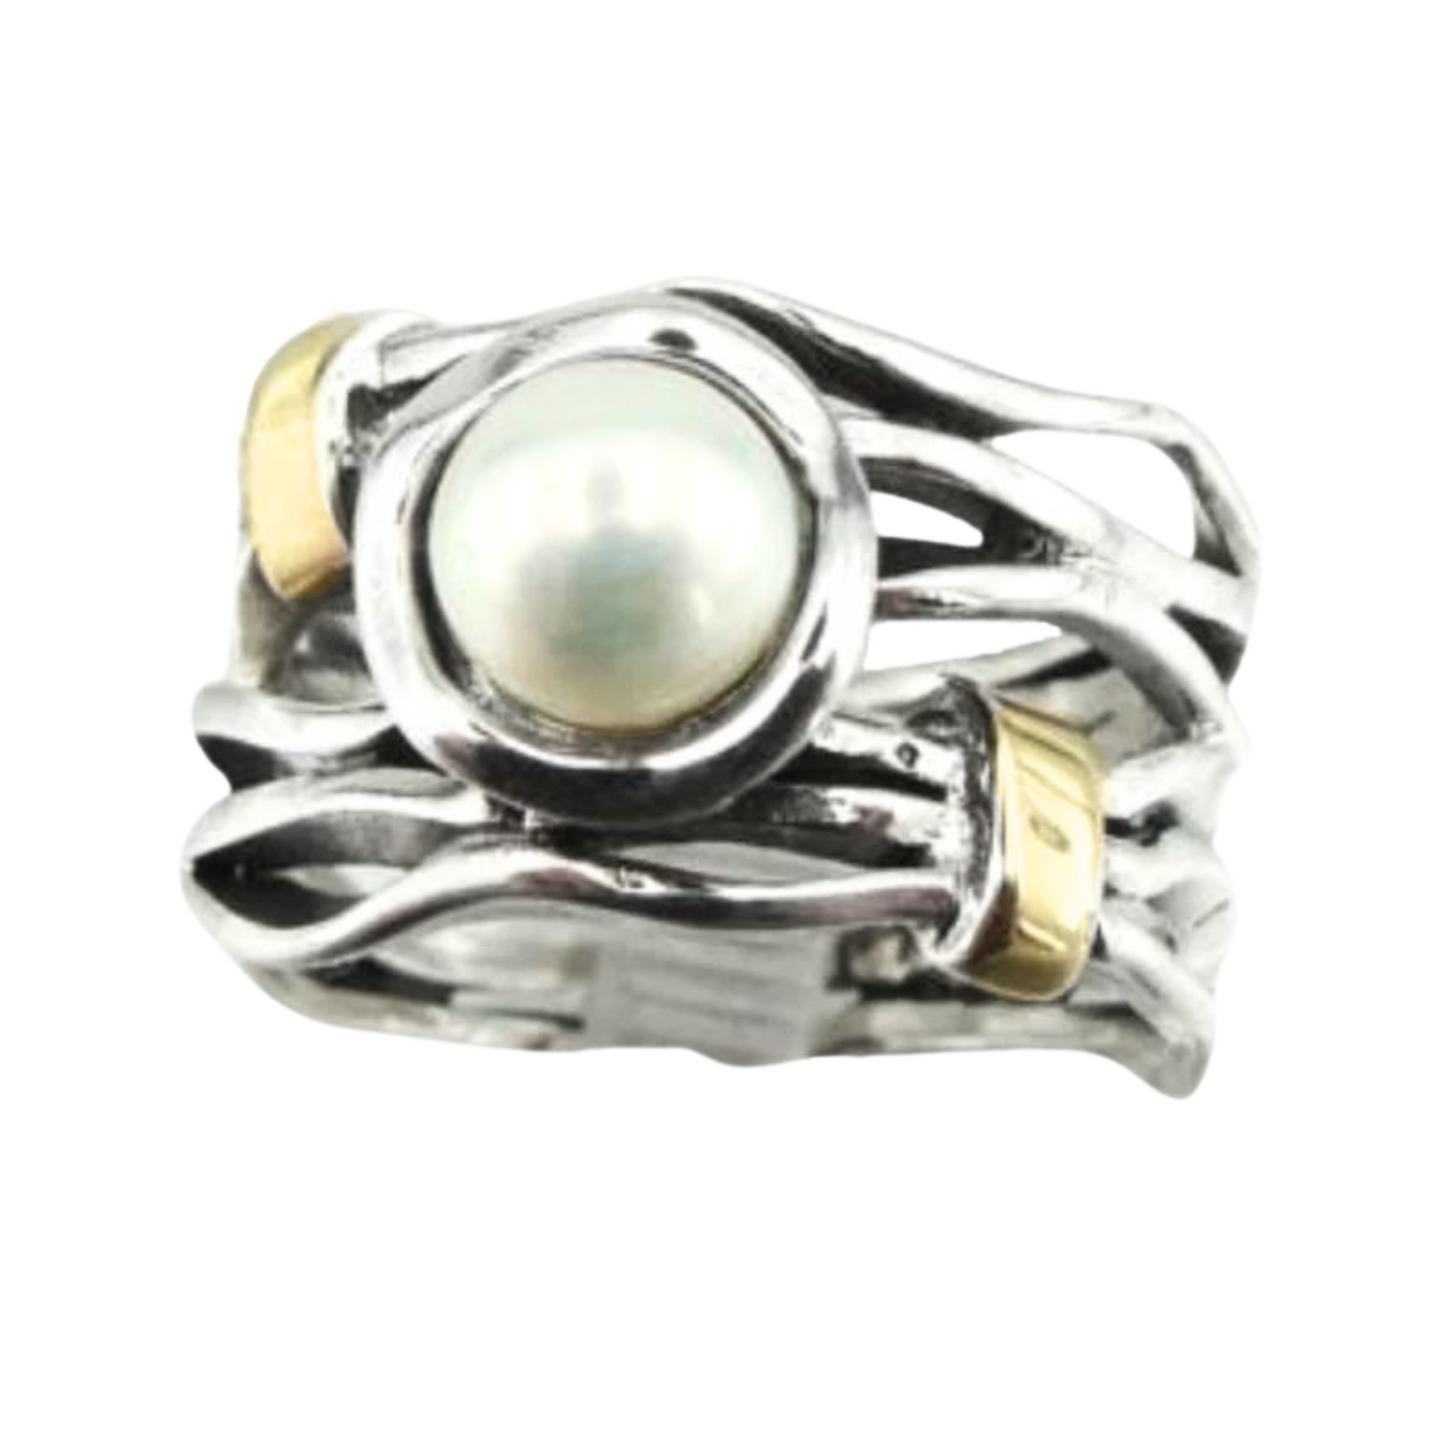 Extremely Elegant pearl ring<br>The ring is made of solid Sterling silver and 9K Yellow Gold, decorated with natural white pearl.